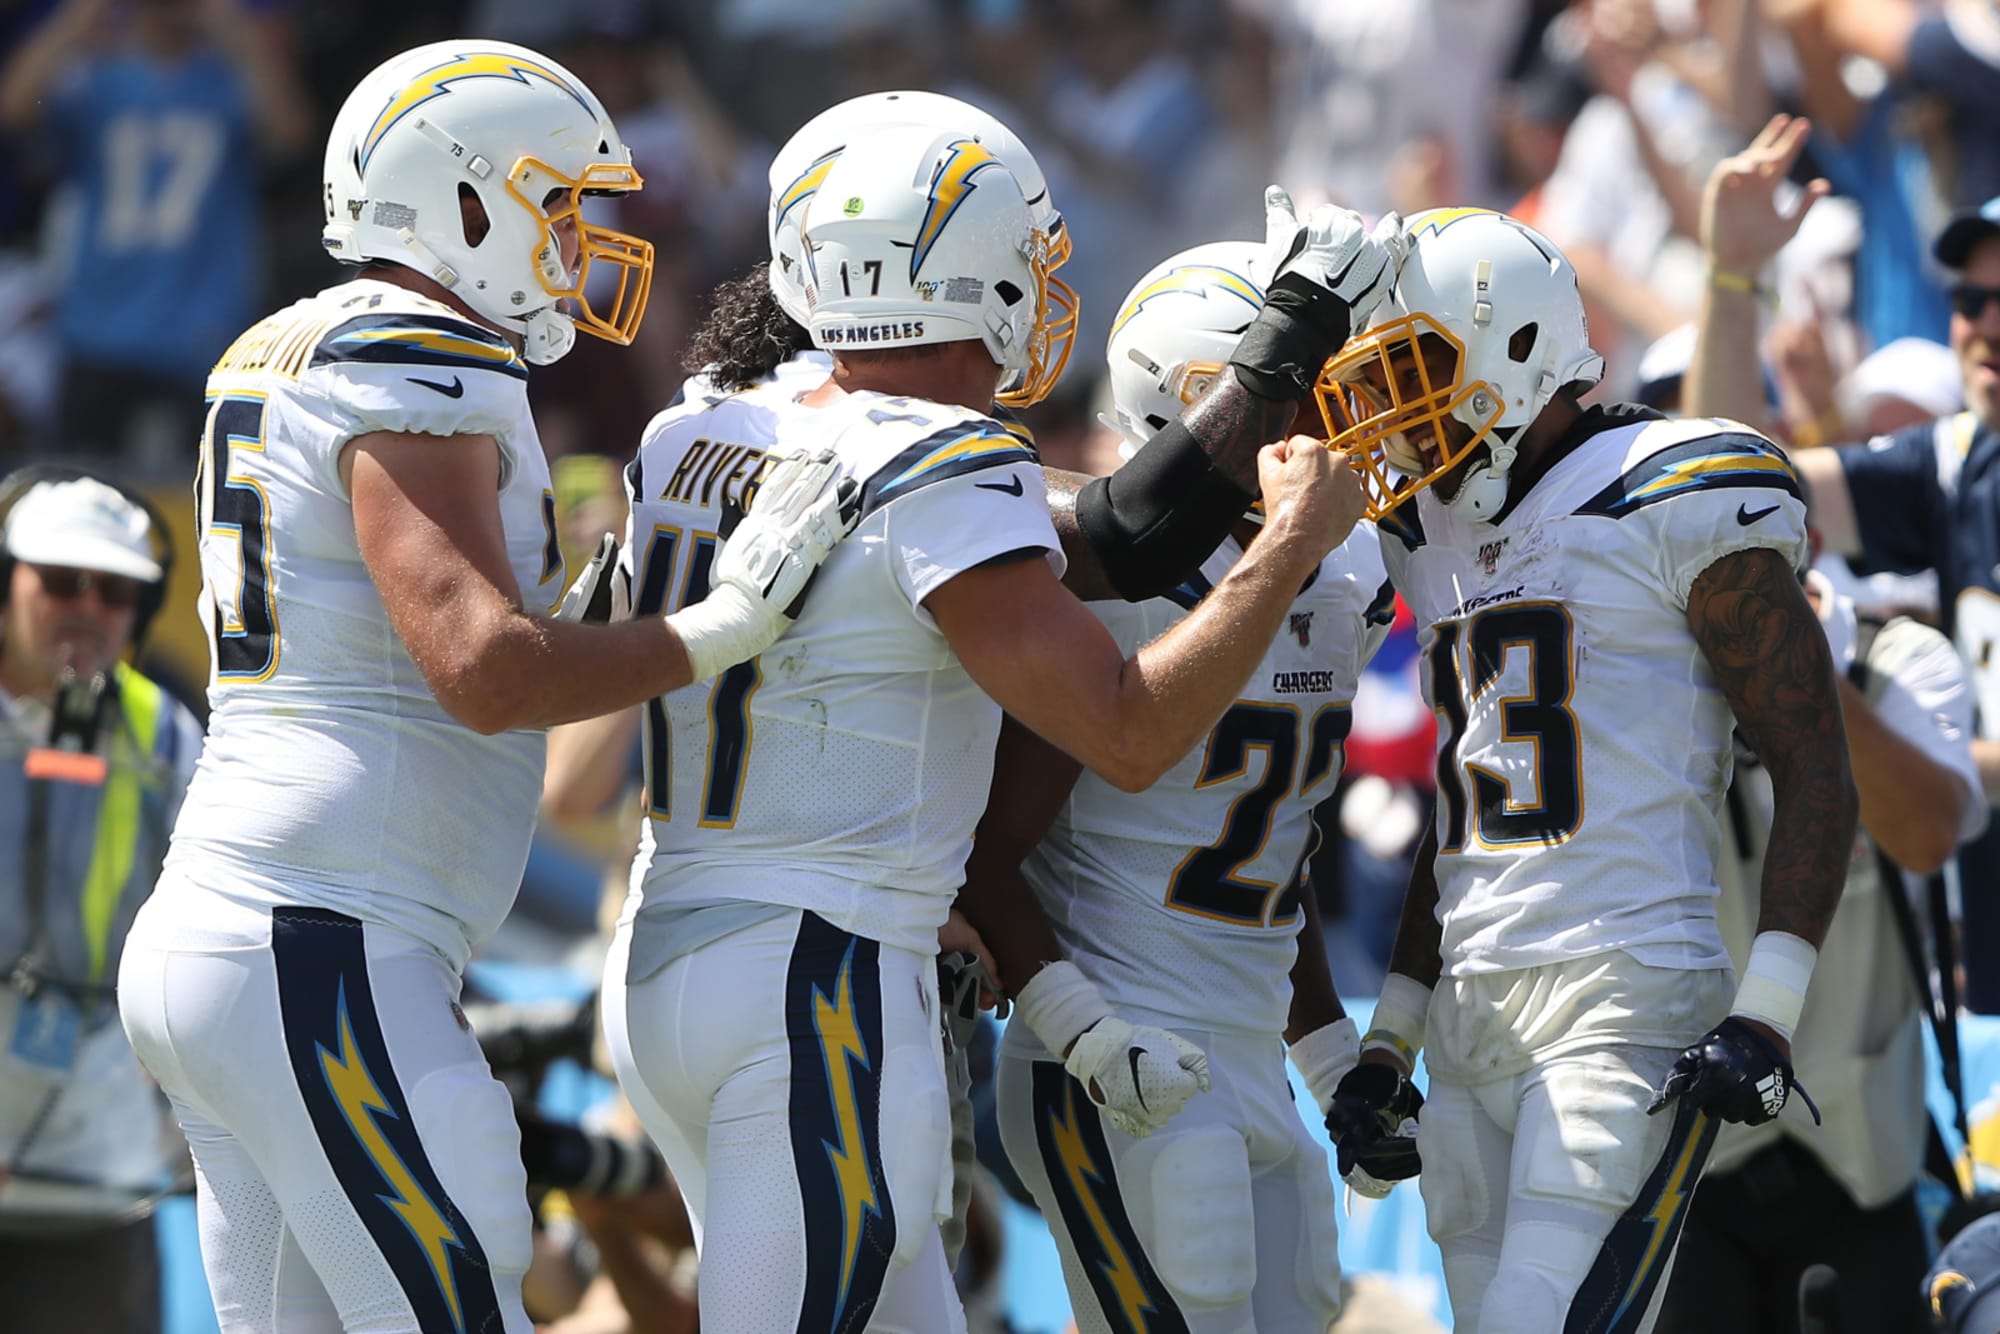 Los Angeles Chargers vs. Indianapolis Colts